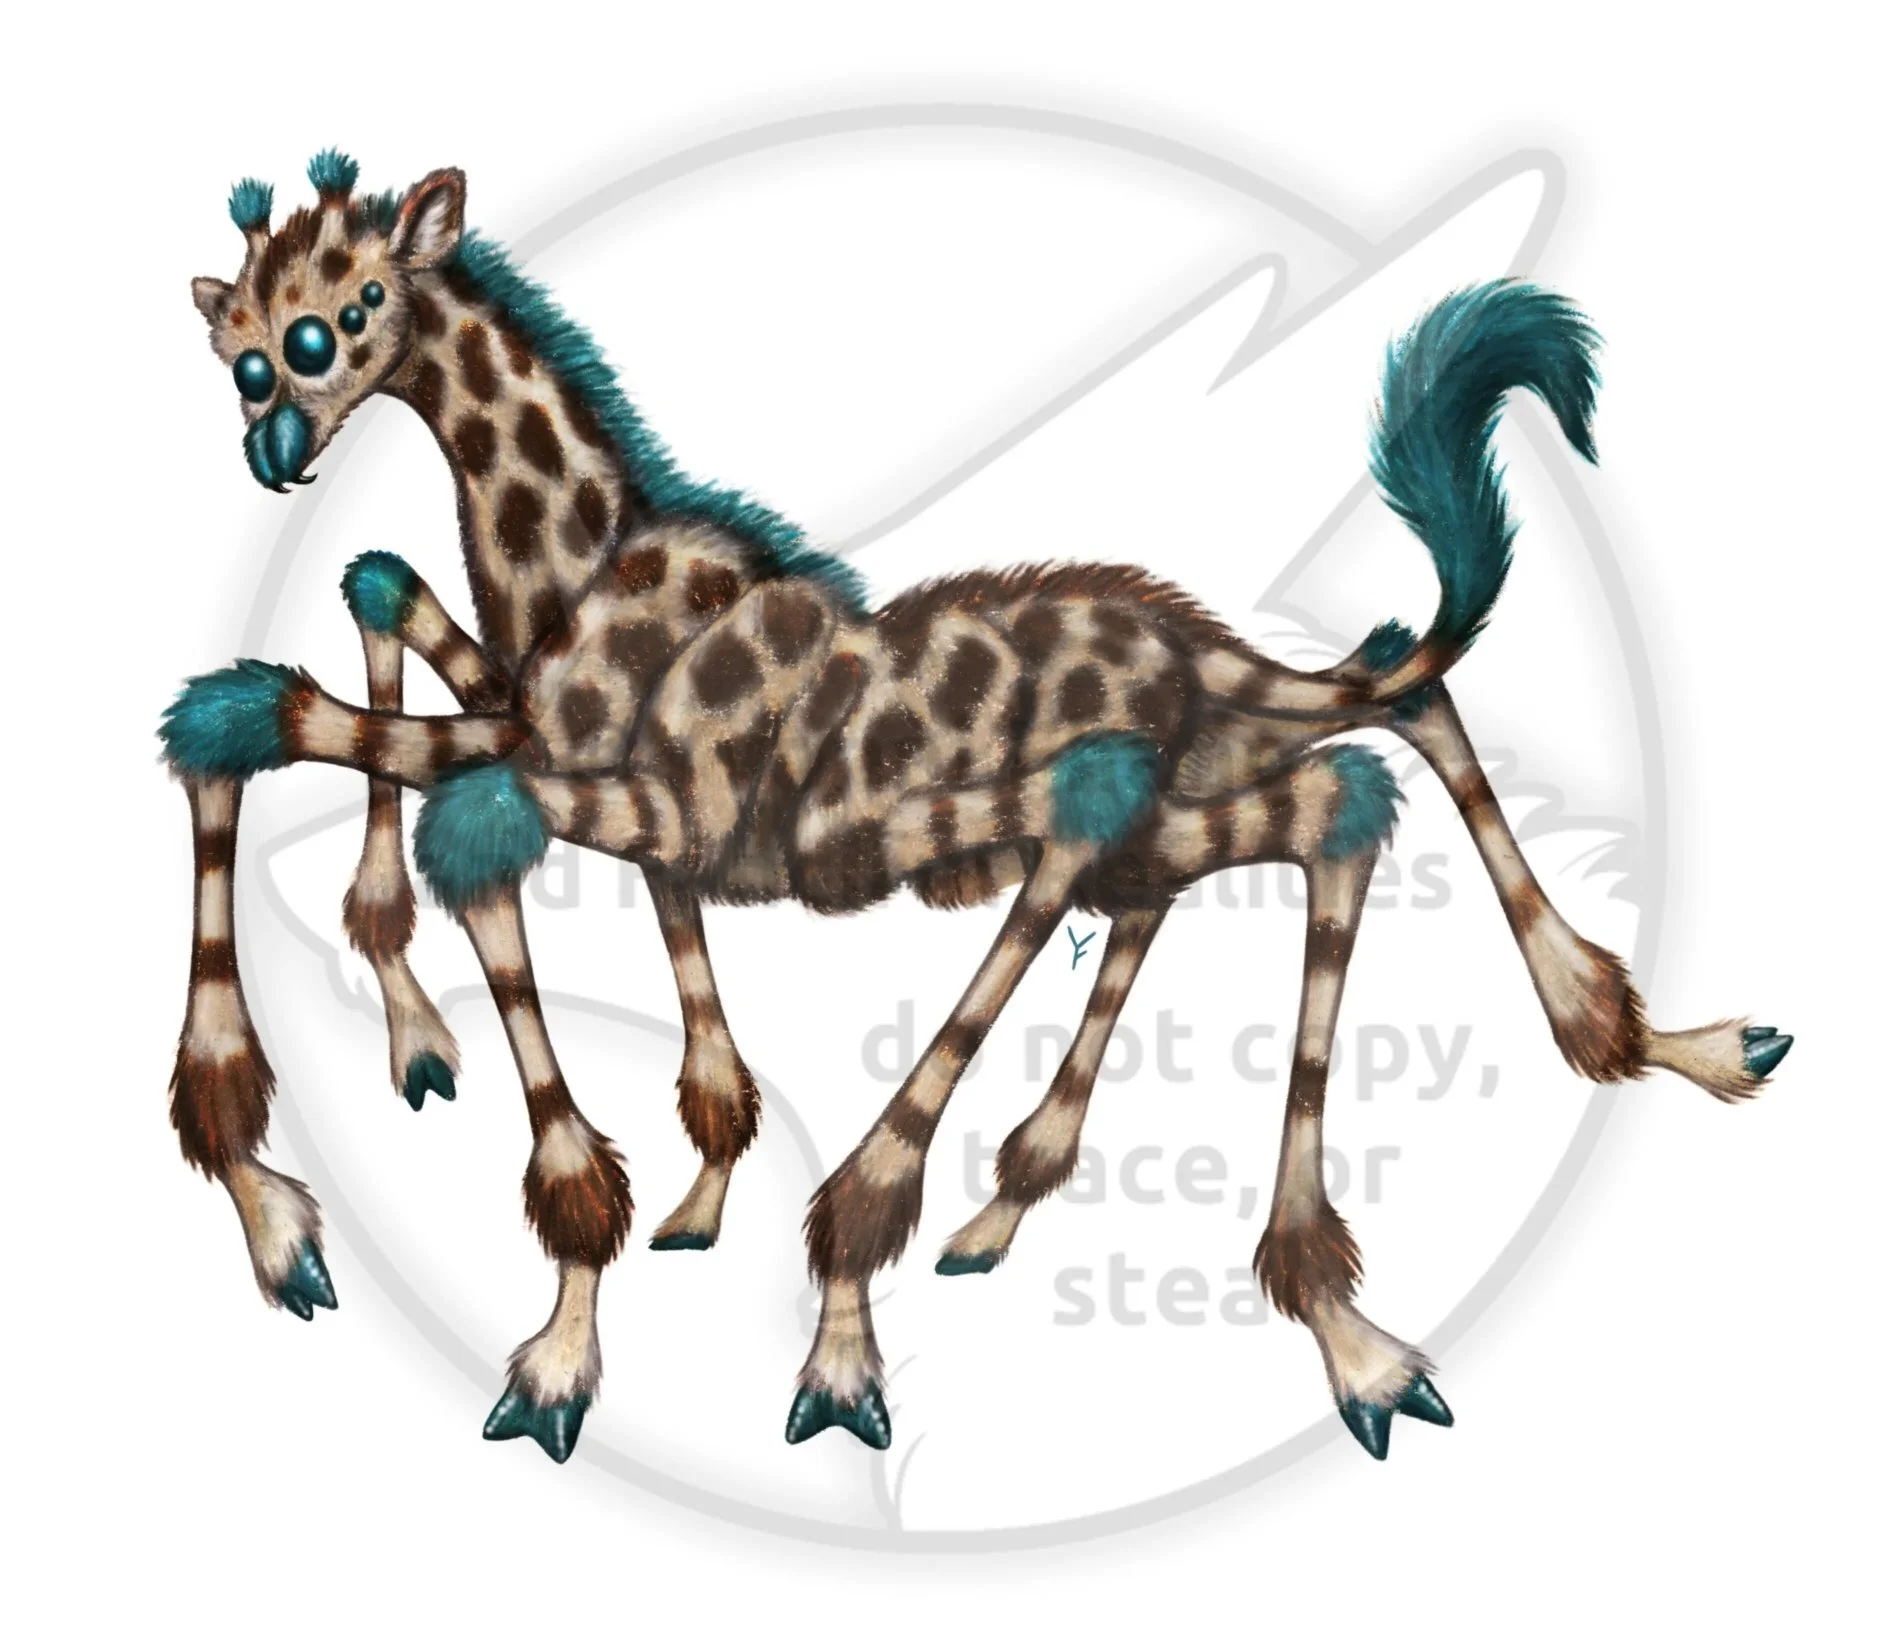 A hybrid animal, a fuzzy jumping spider and a spotted giraffe!